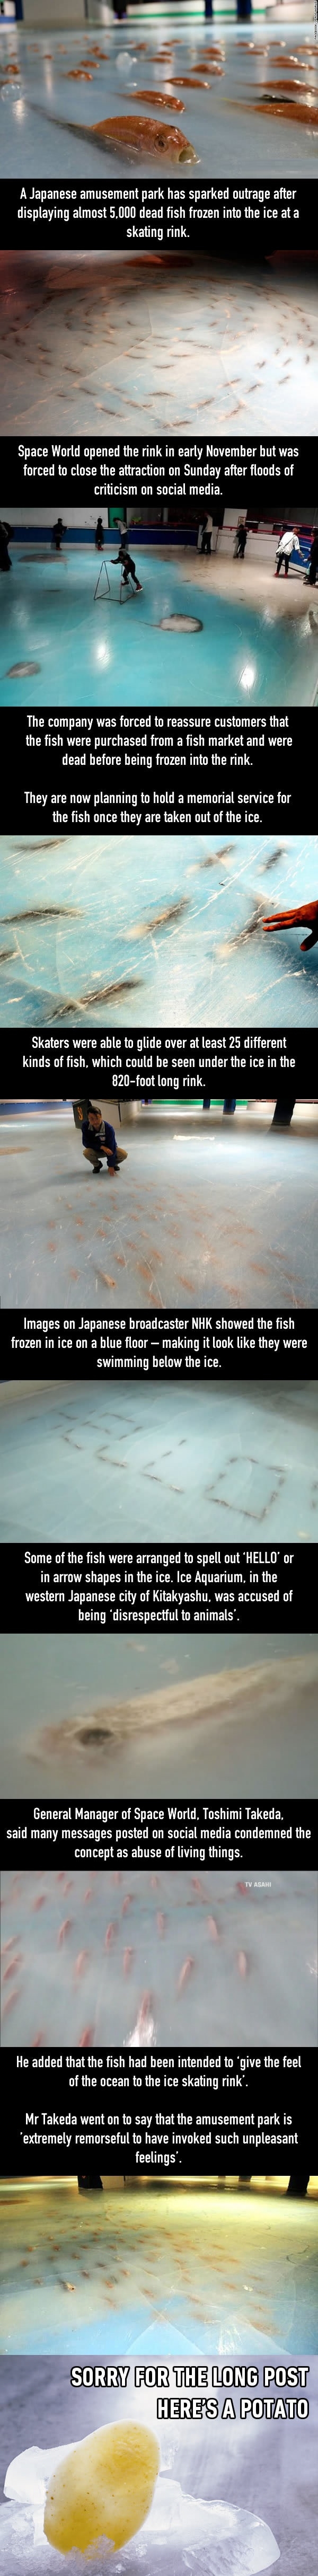 Japanese ice skating rink with 5,000 fish frozen inside